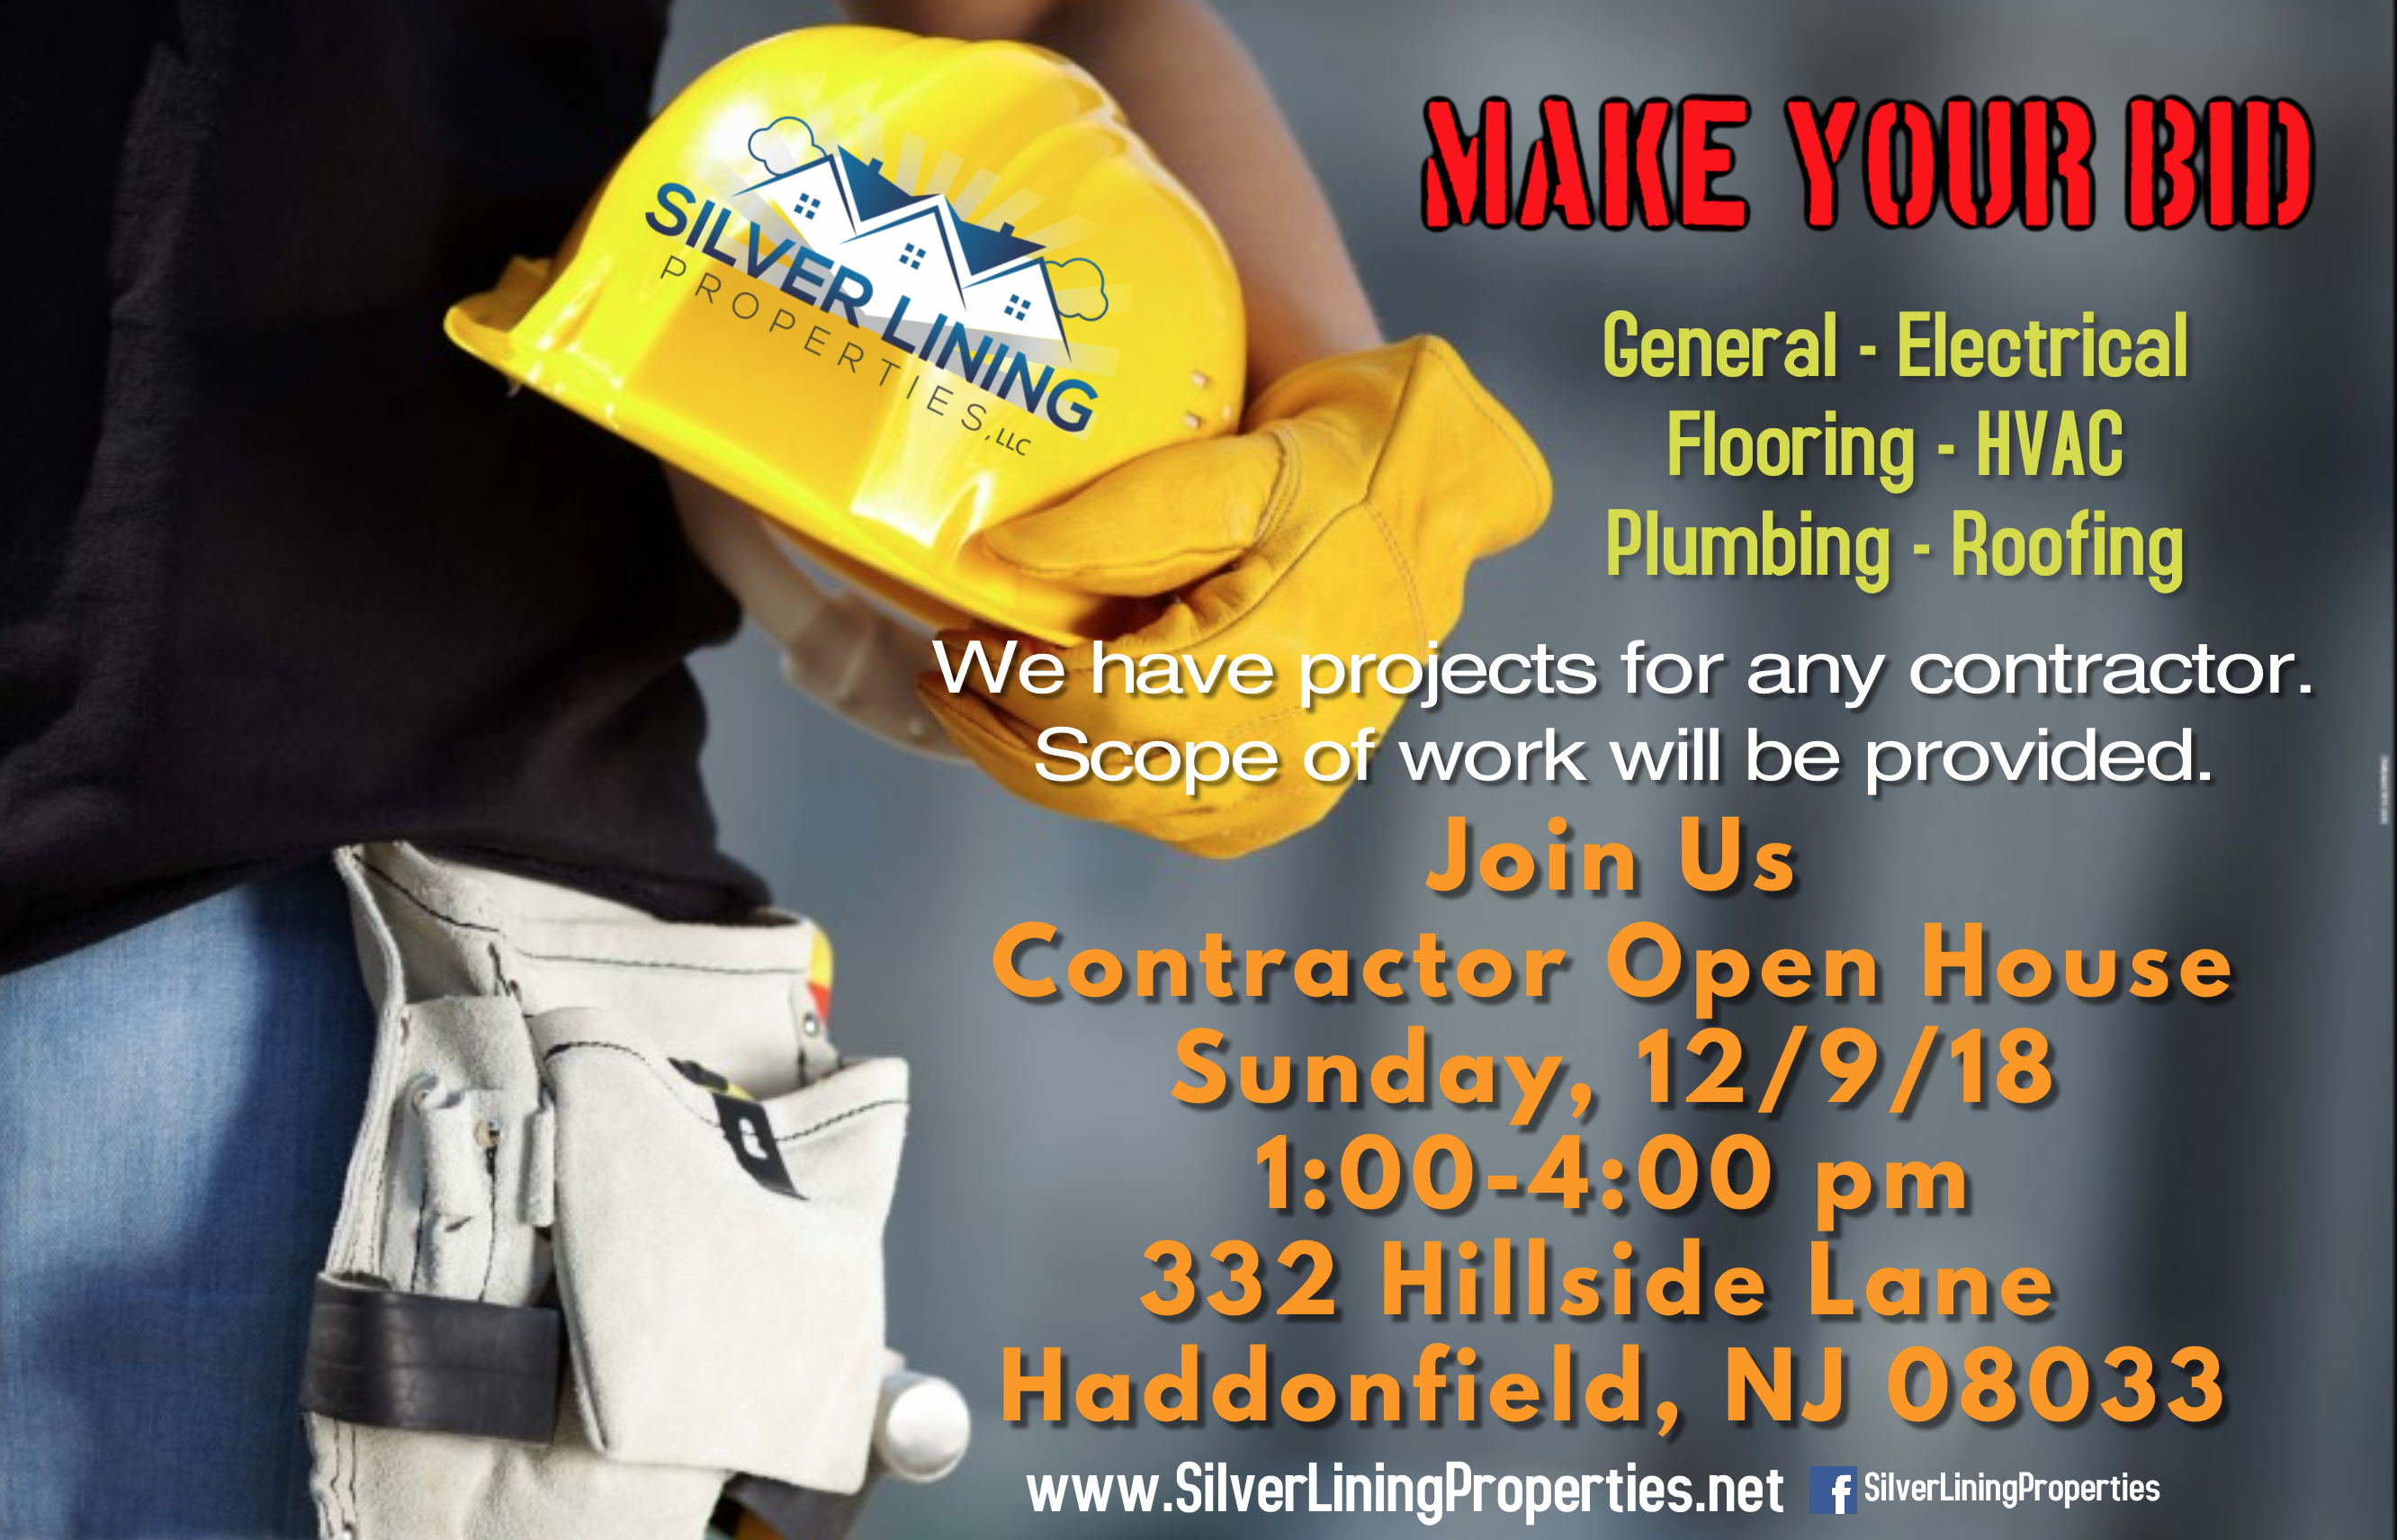 Are you a licensed and insured contractor in NJ?